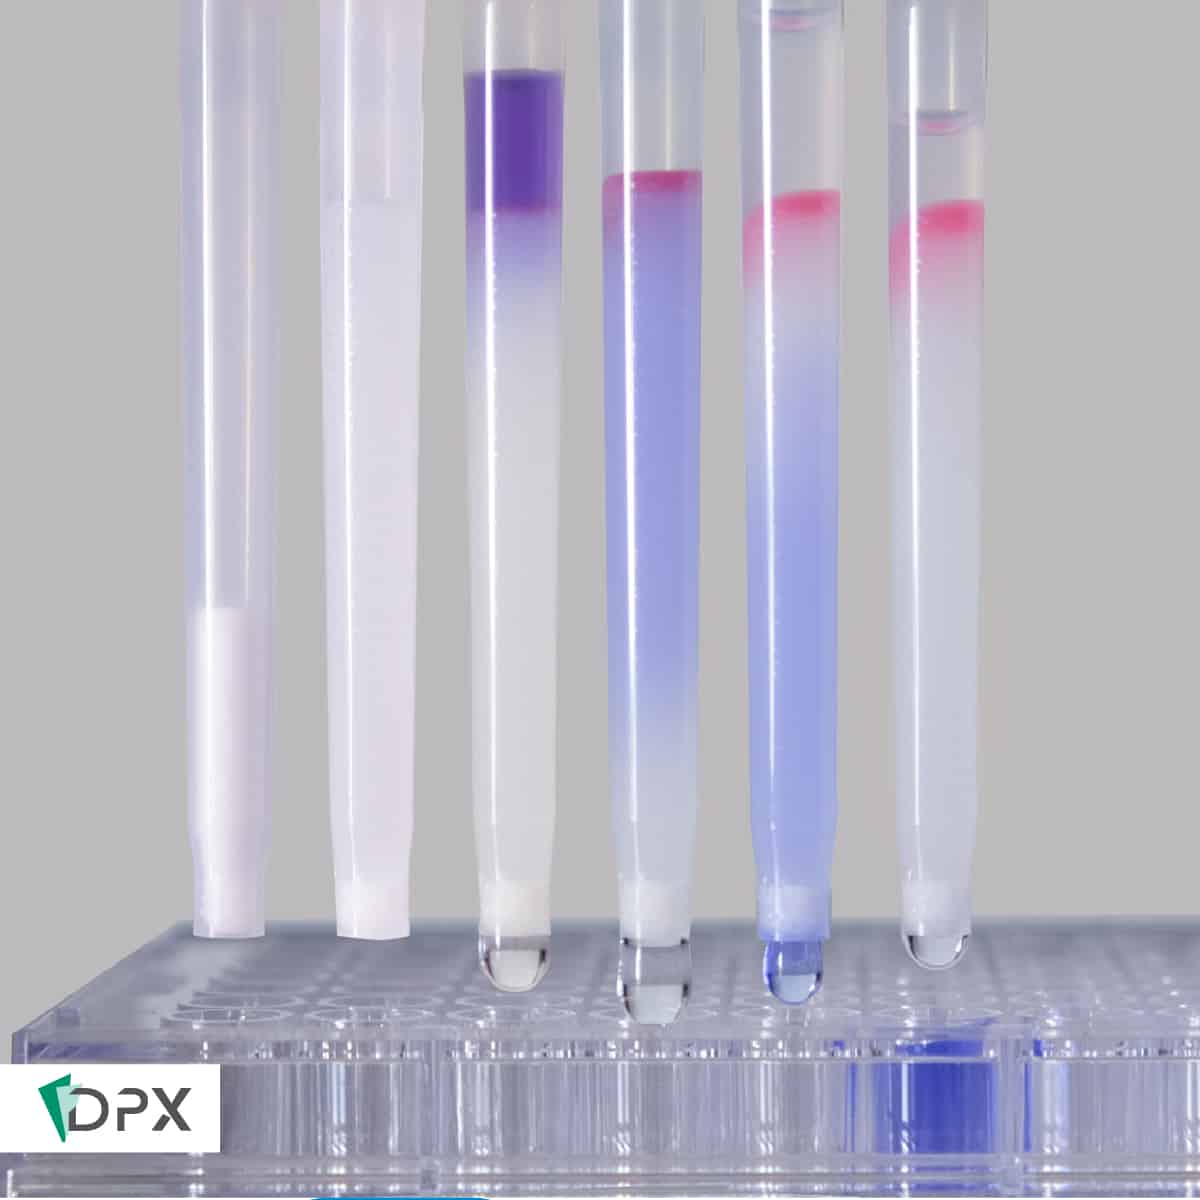 INTip size exclusion chromatography